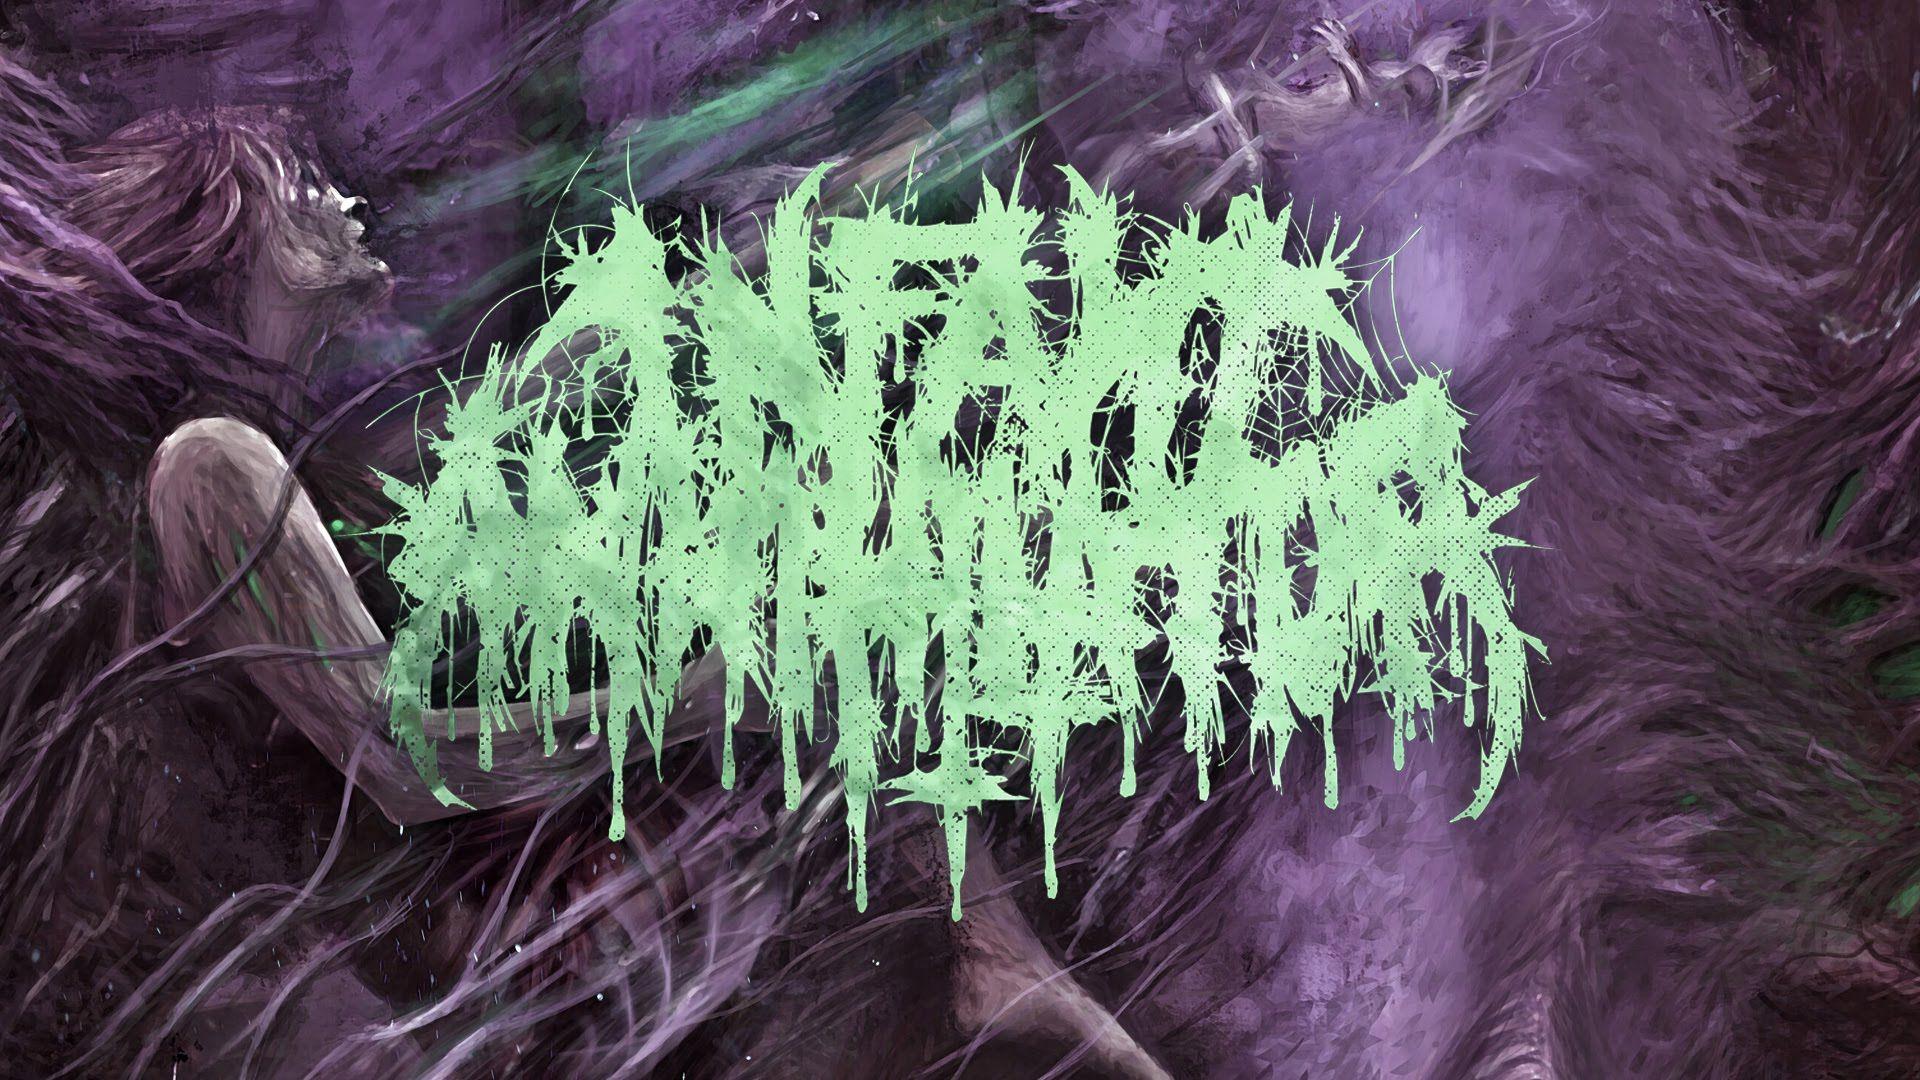 Spotify Removes INFANT ANNIHILATOR Catalog, Deem The Band Too